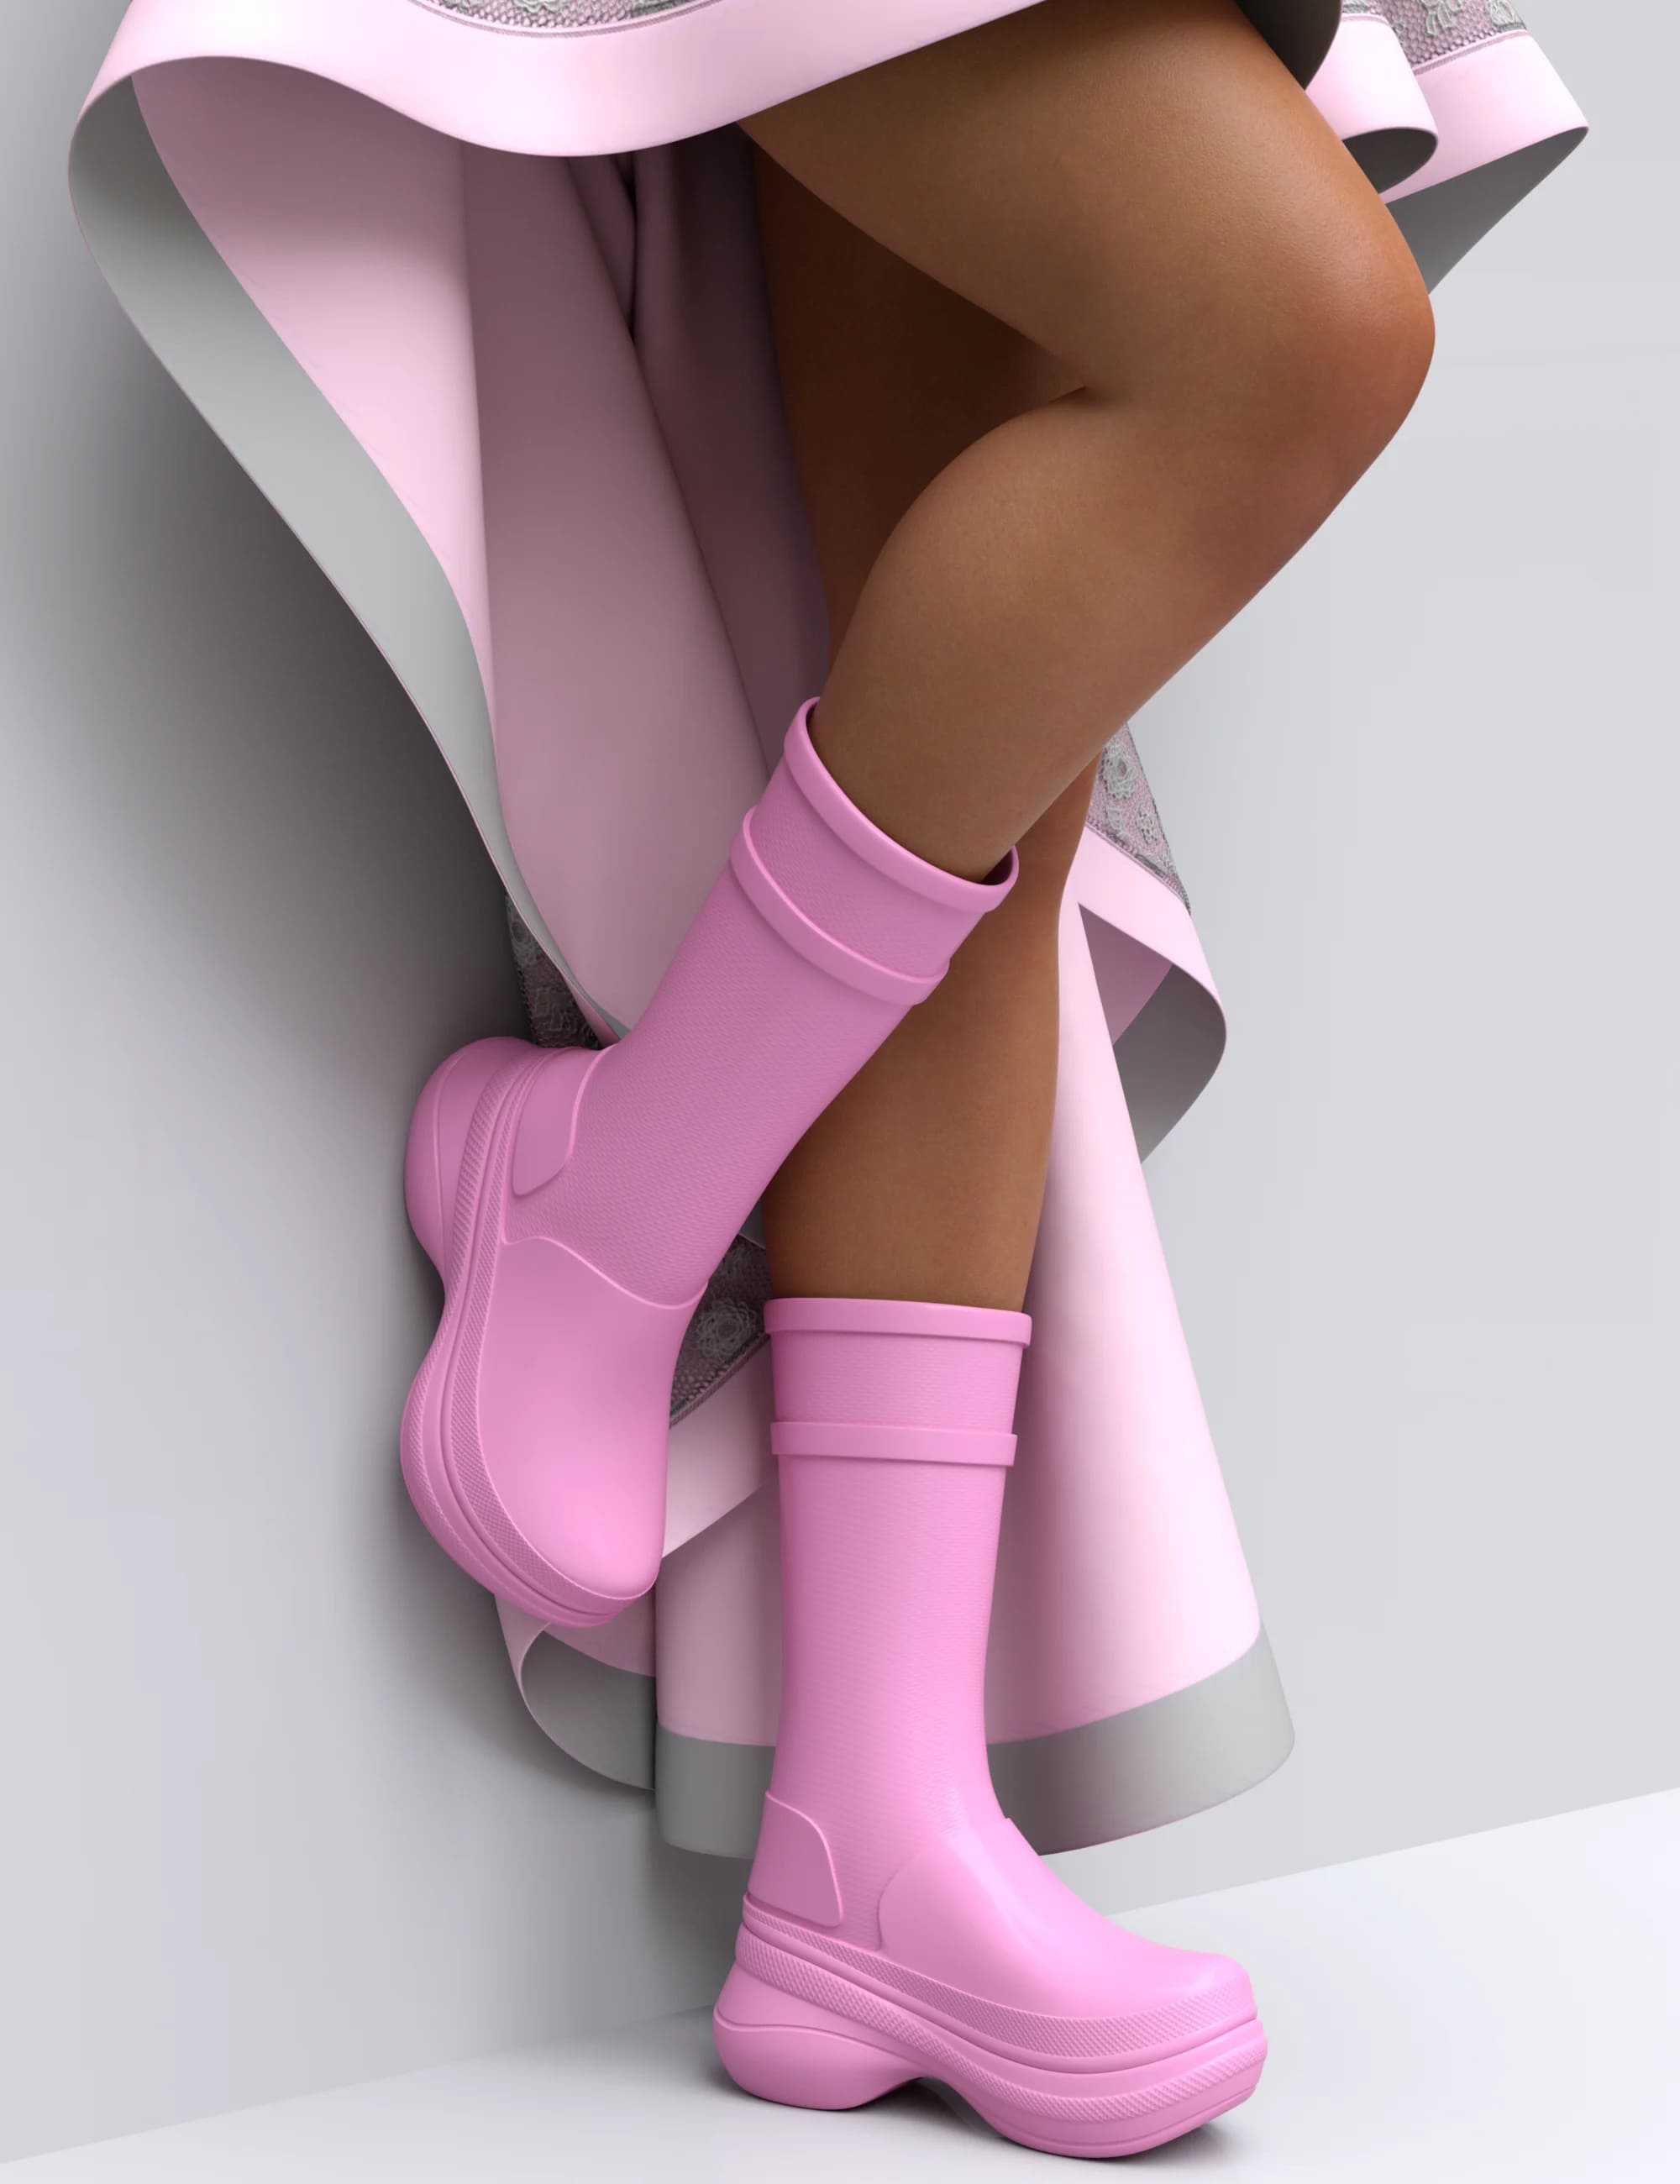 HL Rubber Boots for Genesis 8 and 8.1 Female_DAZ3D下载站